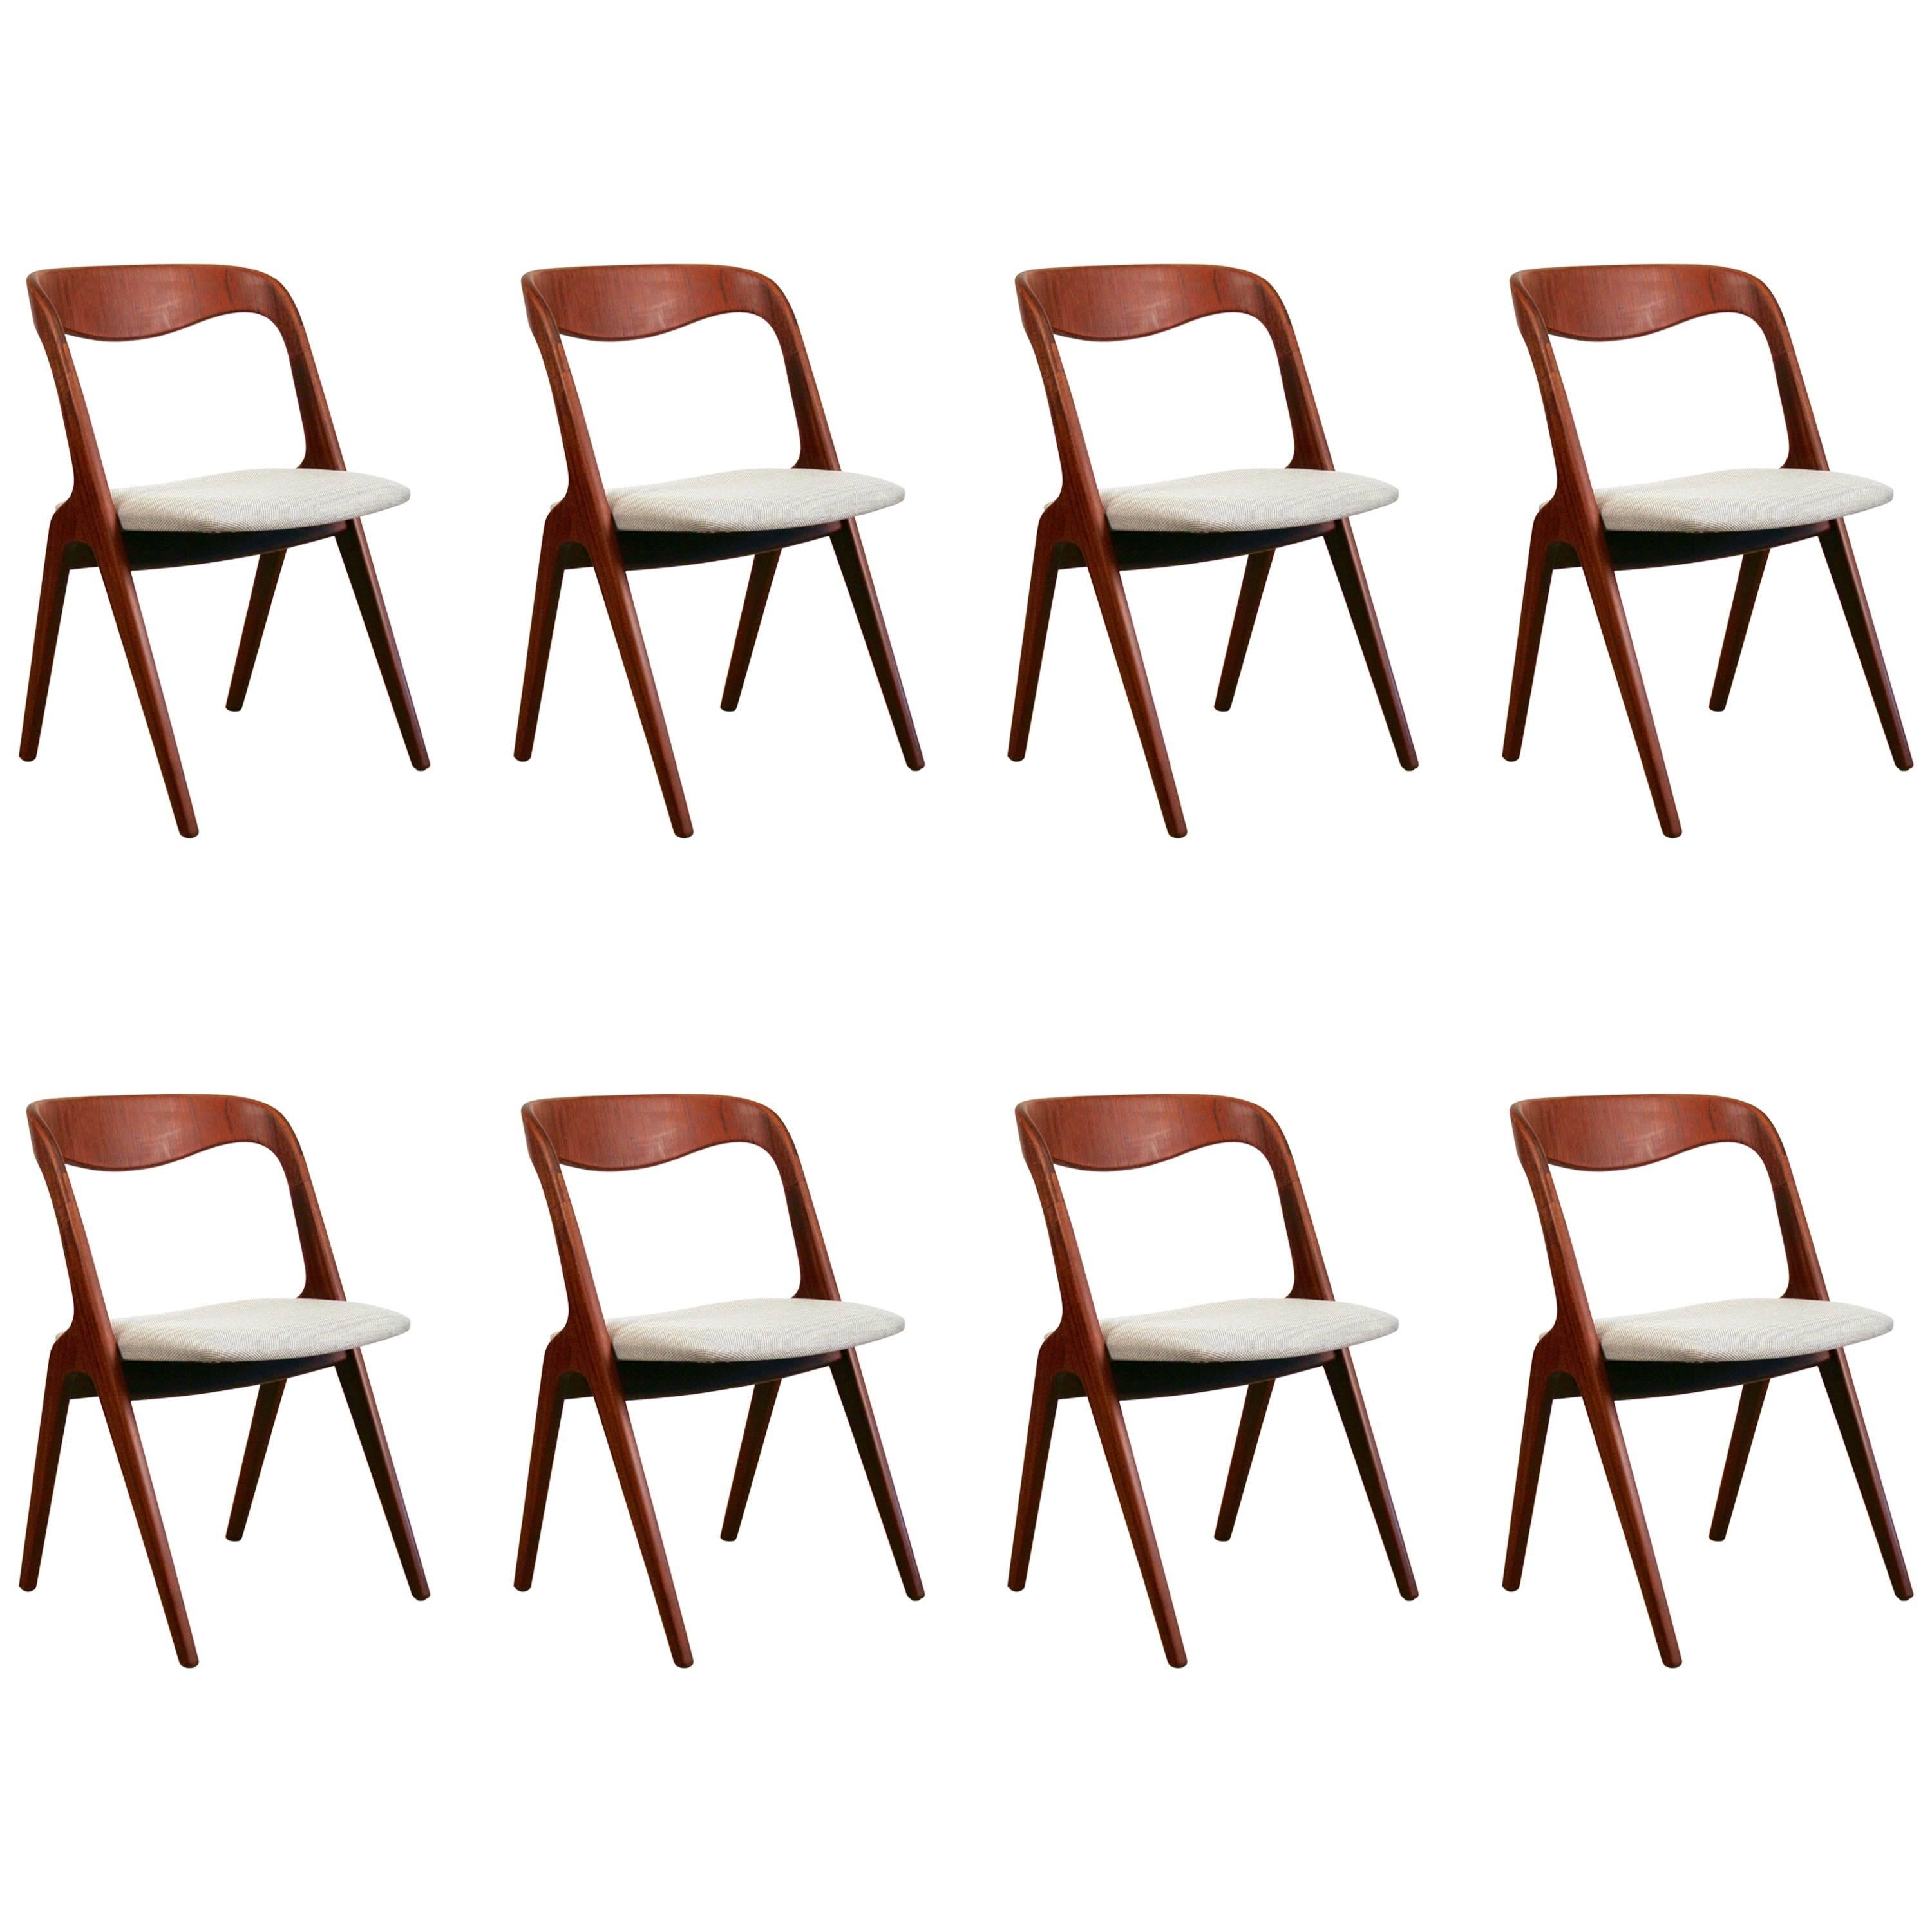 Vintage Danish Teak Dining Chairs For Sale